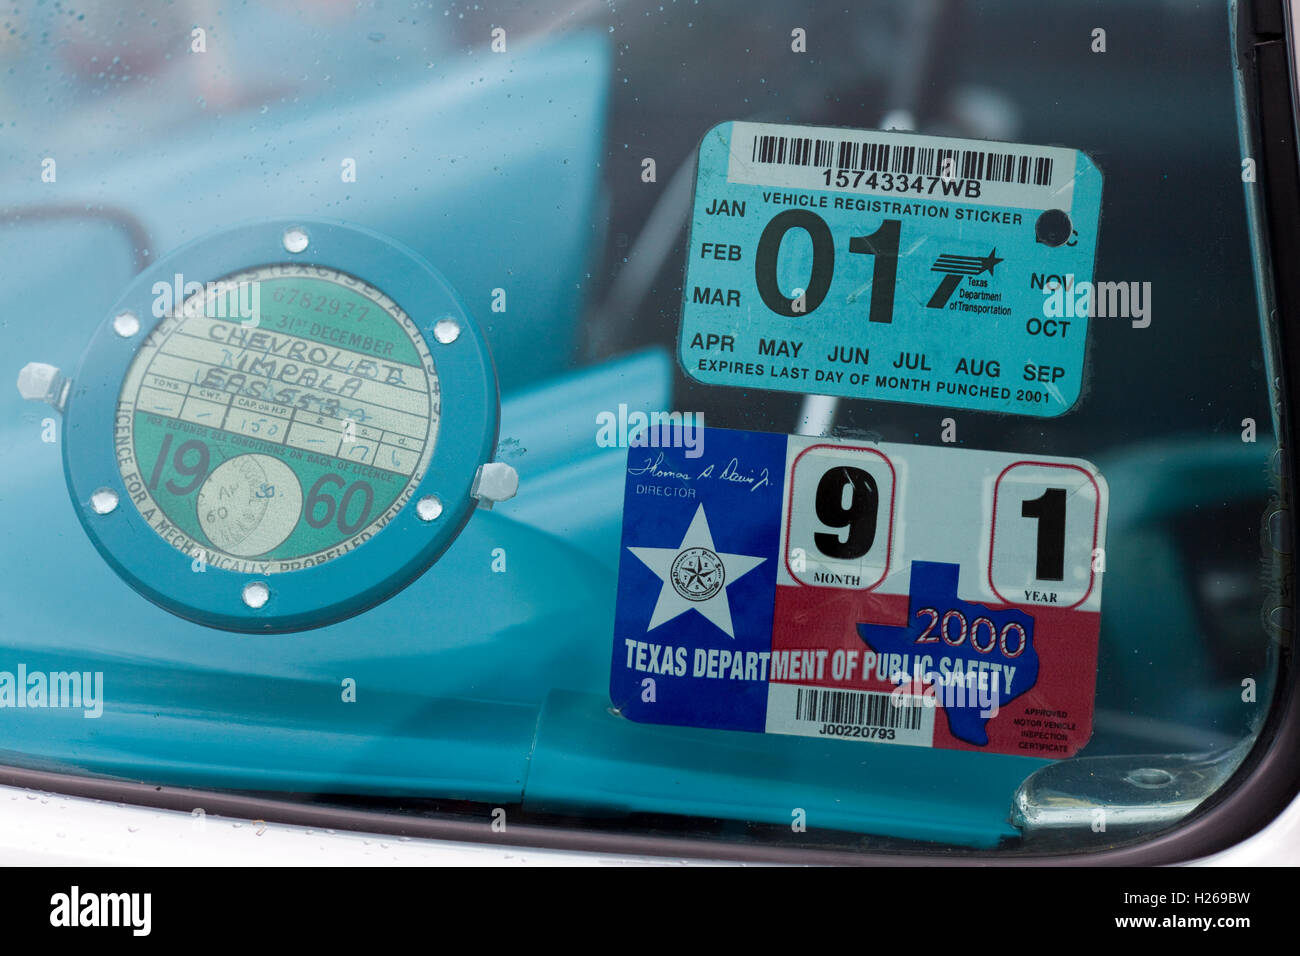 Tax disc and Texas department of public safety sticker Stock Photo